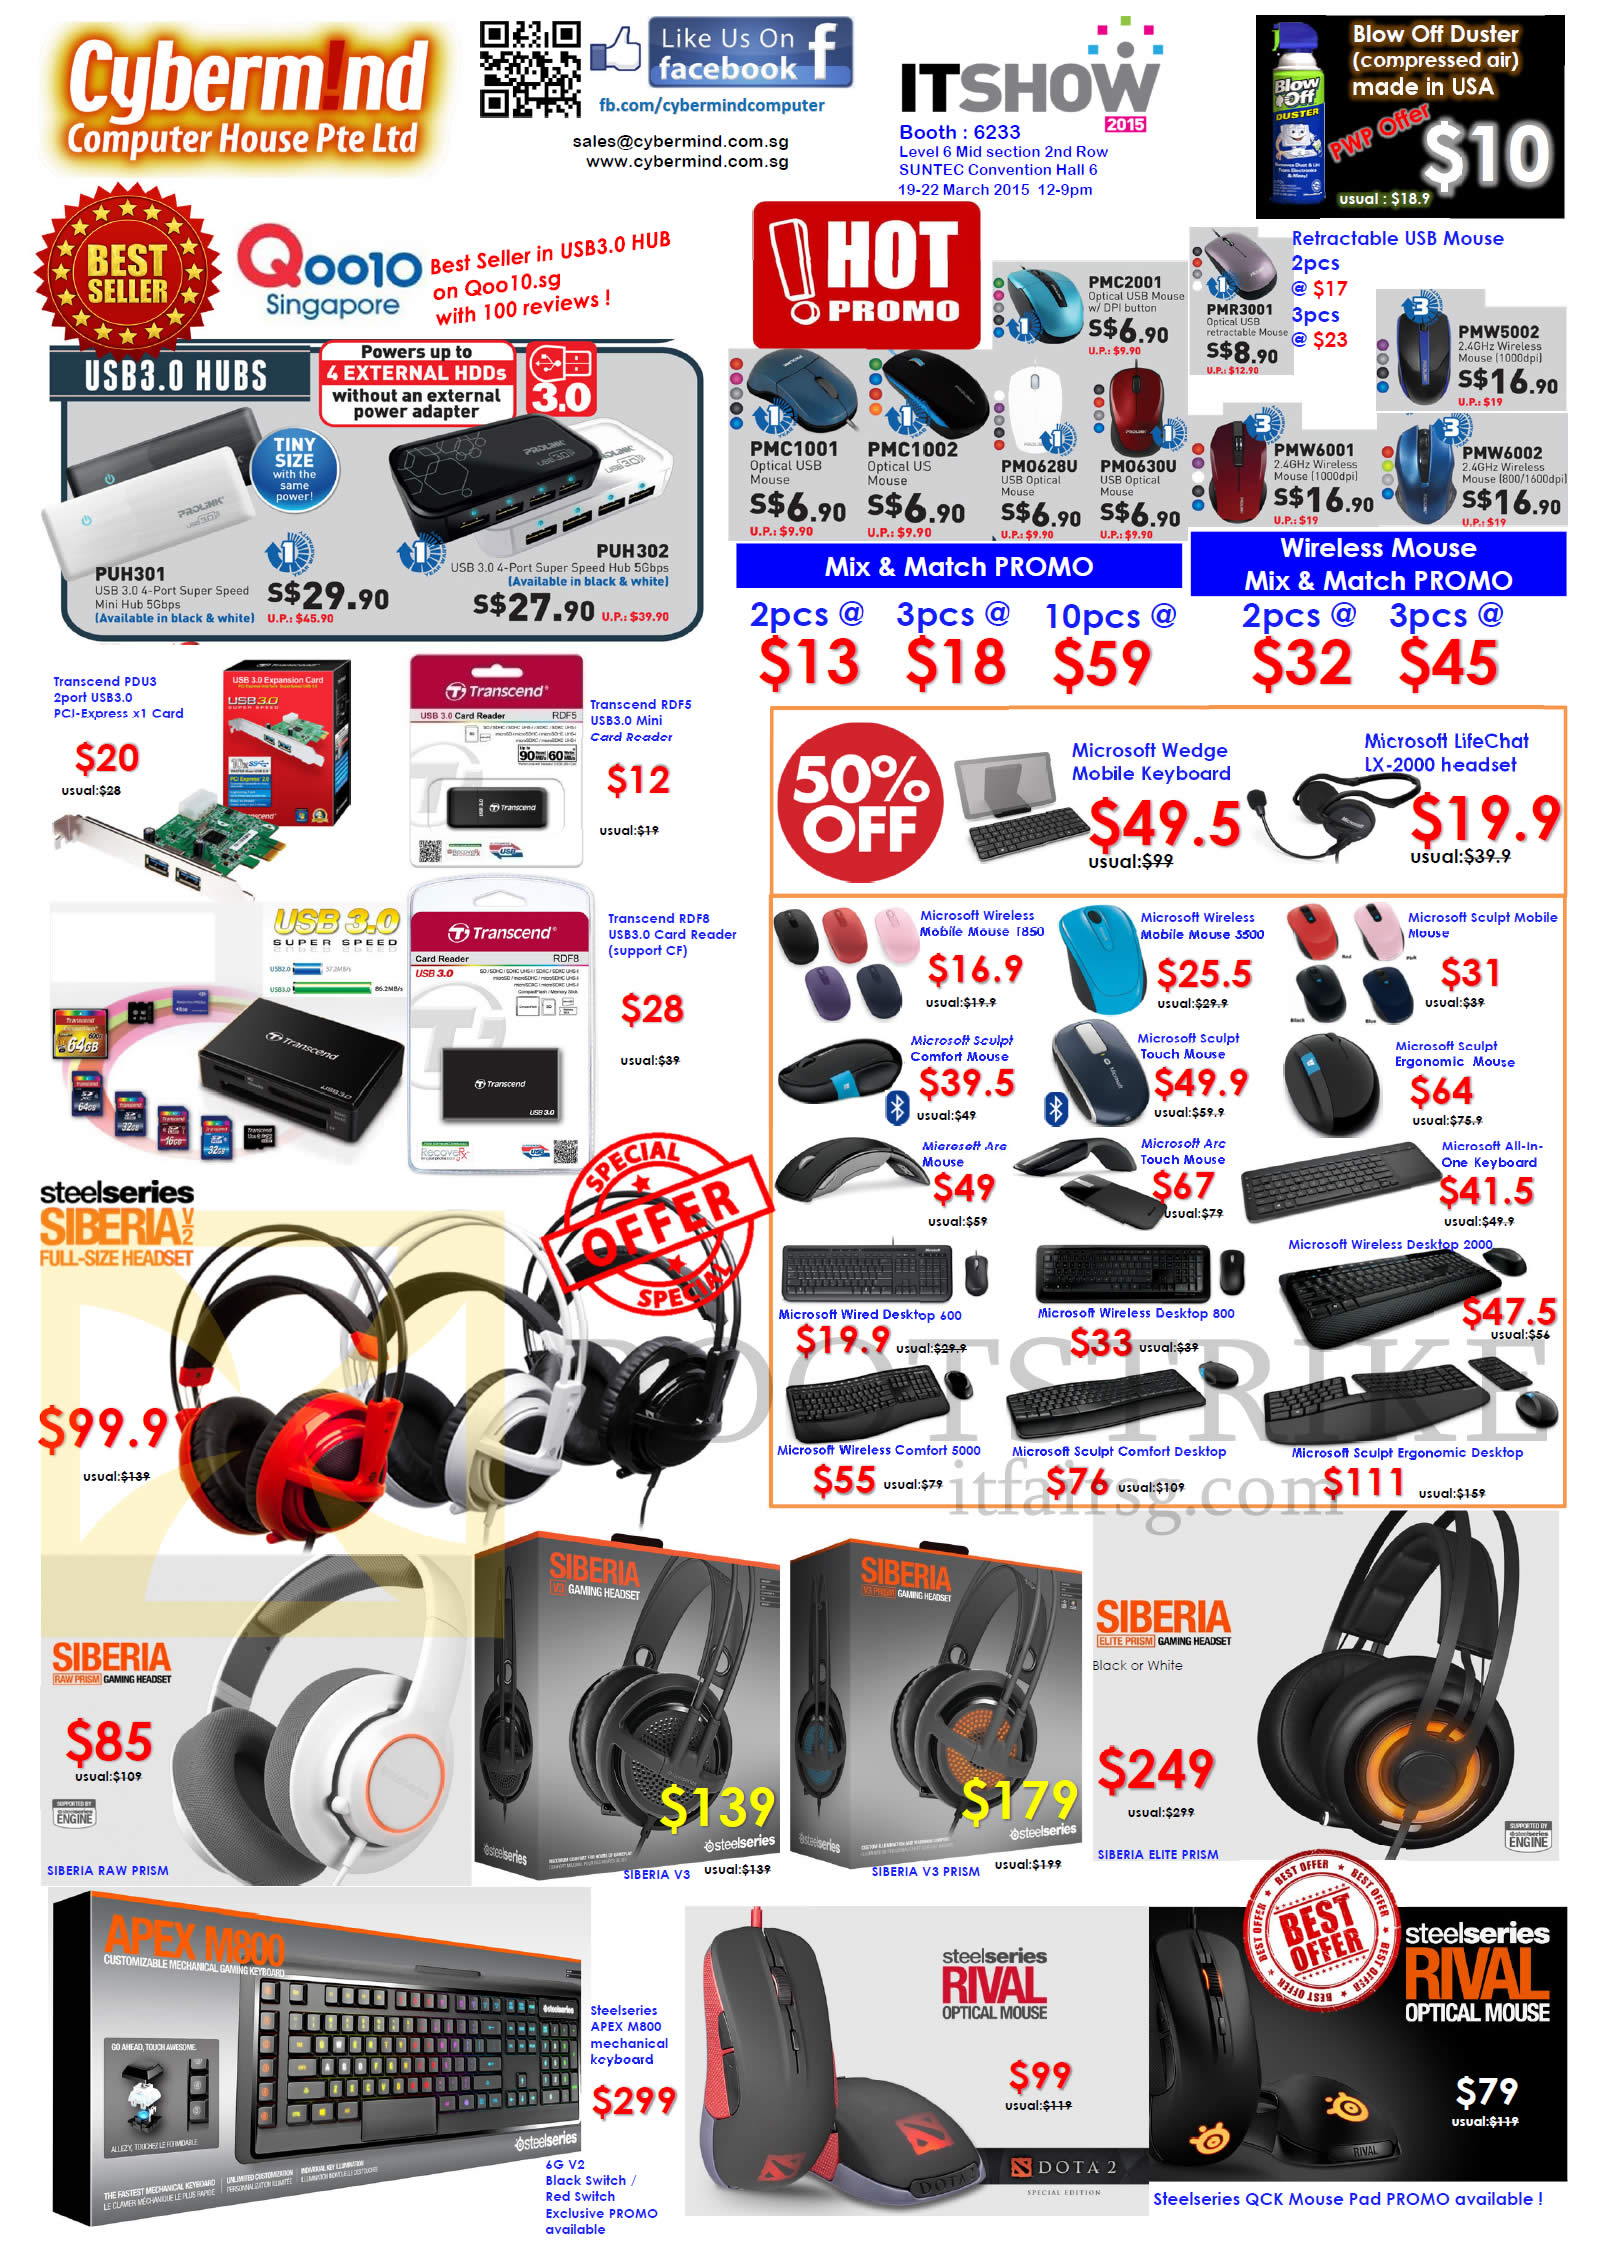 IT SHOW 2015 price list image brochure of Cybermind Accessories USB Hubs, Headphones, Keyboards, Mouse, Bluetooth Headset, SteelSeries, Microsof Sculpt, Transcend, Prolink